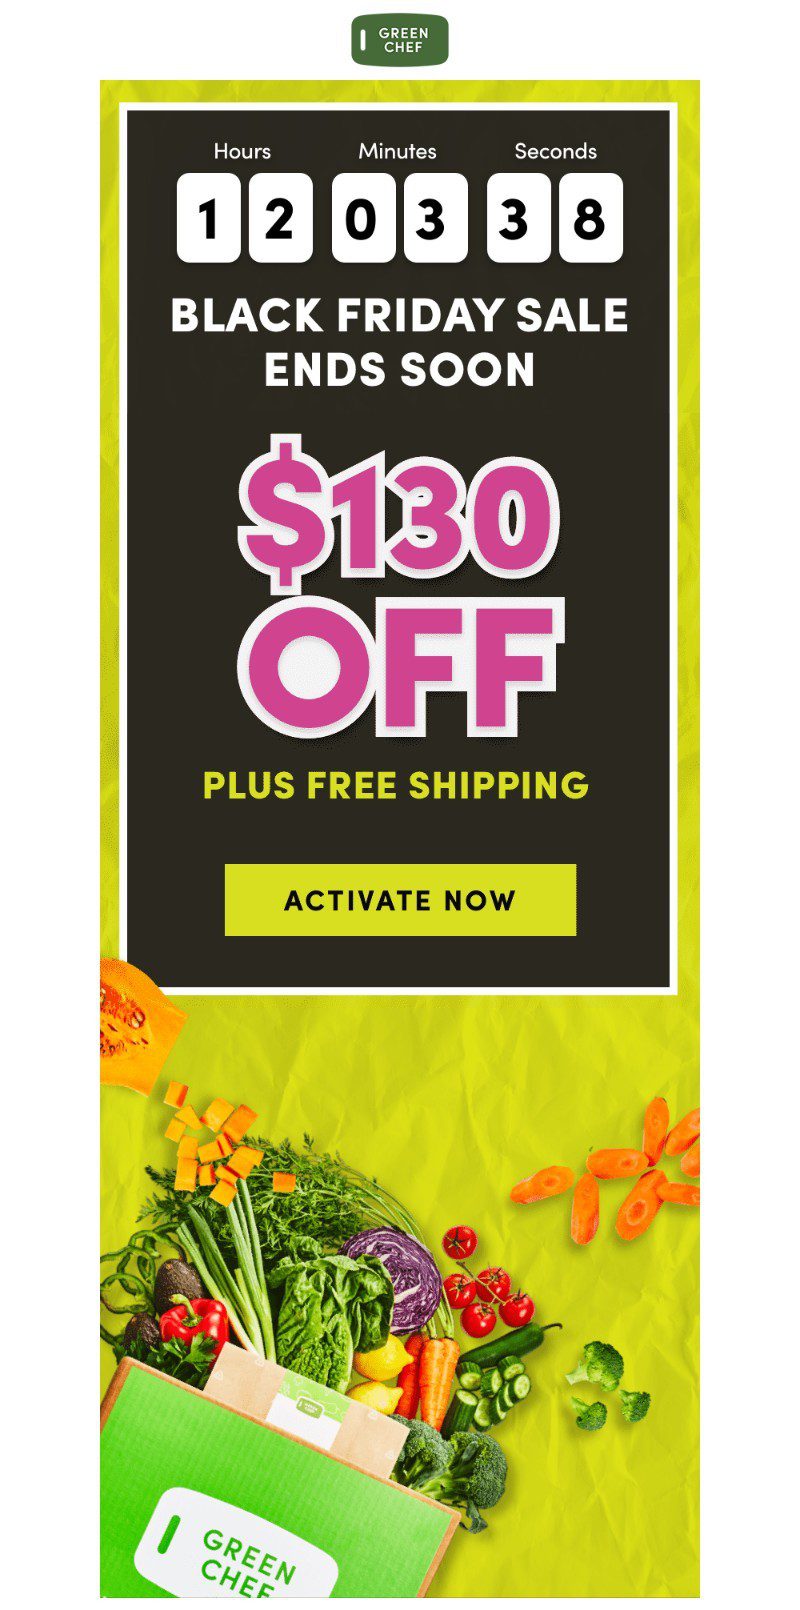 A black Friday marketing poster that shows $130 off plus free shipping. Below that there is a button that says "activate now". 